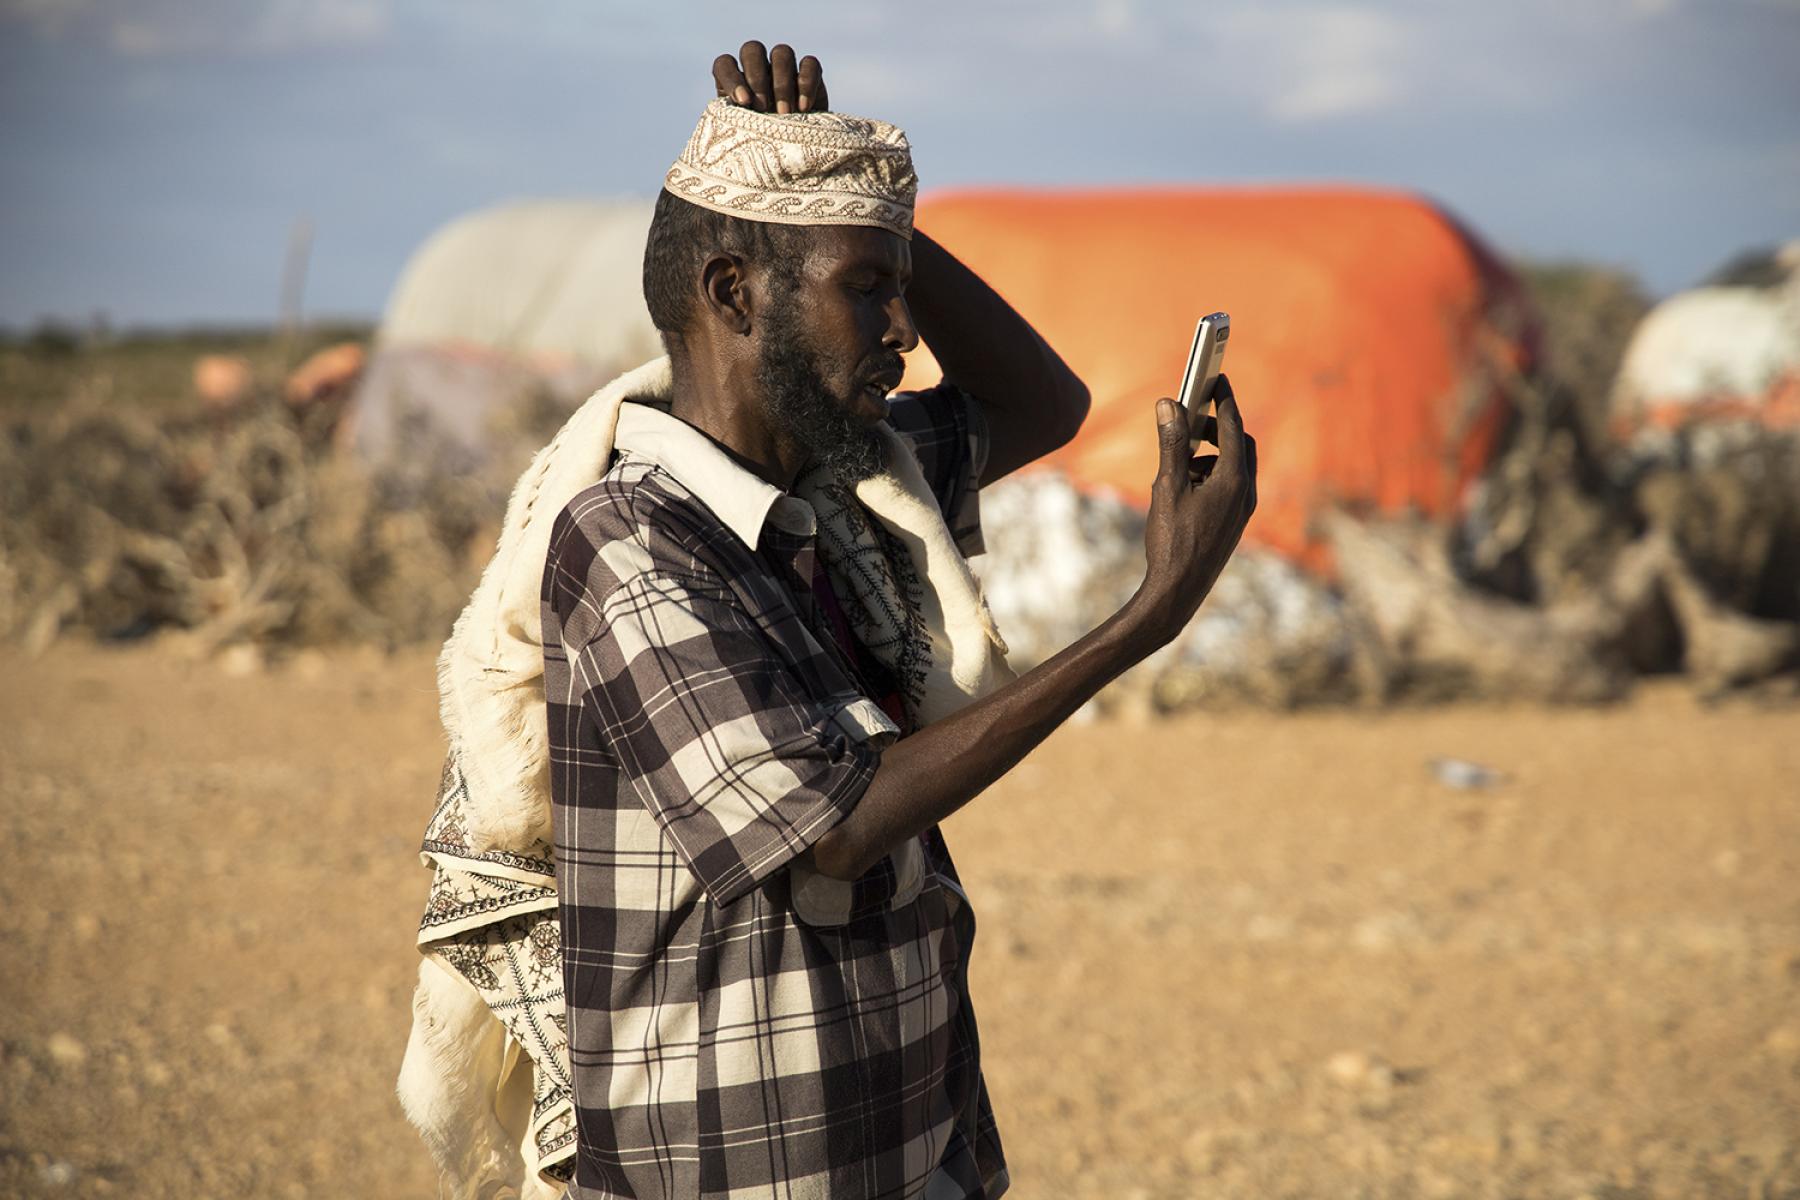 A man checks the network reception on his phone in the village of Faleyare in Northern Somalia.